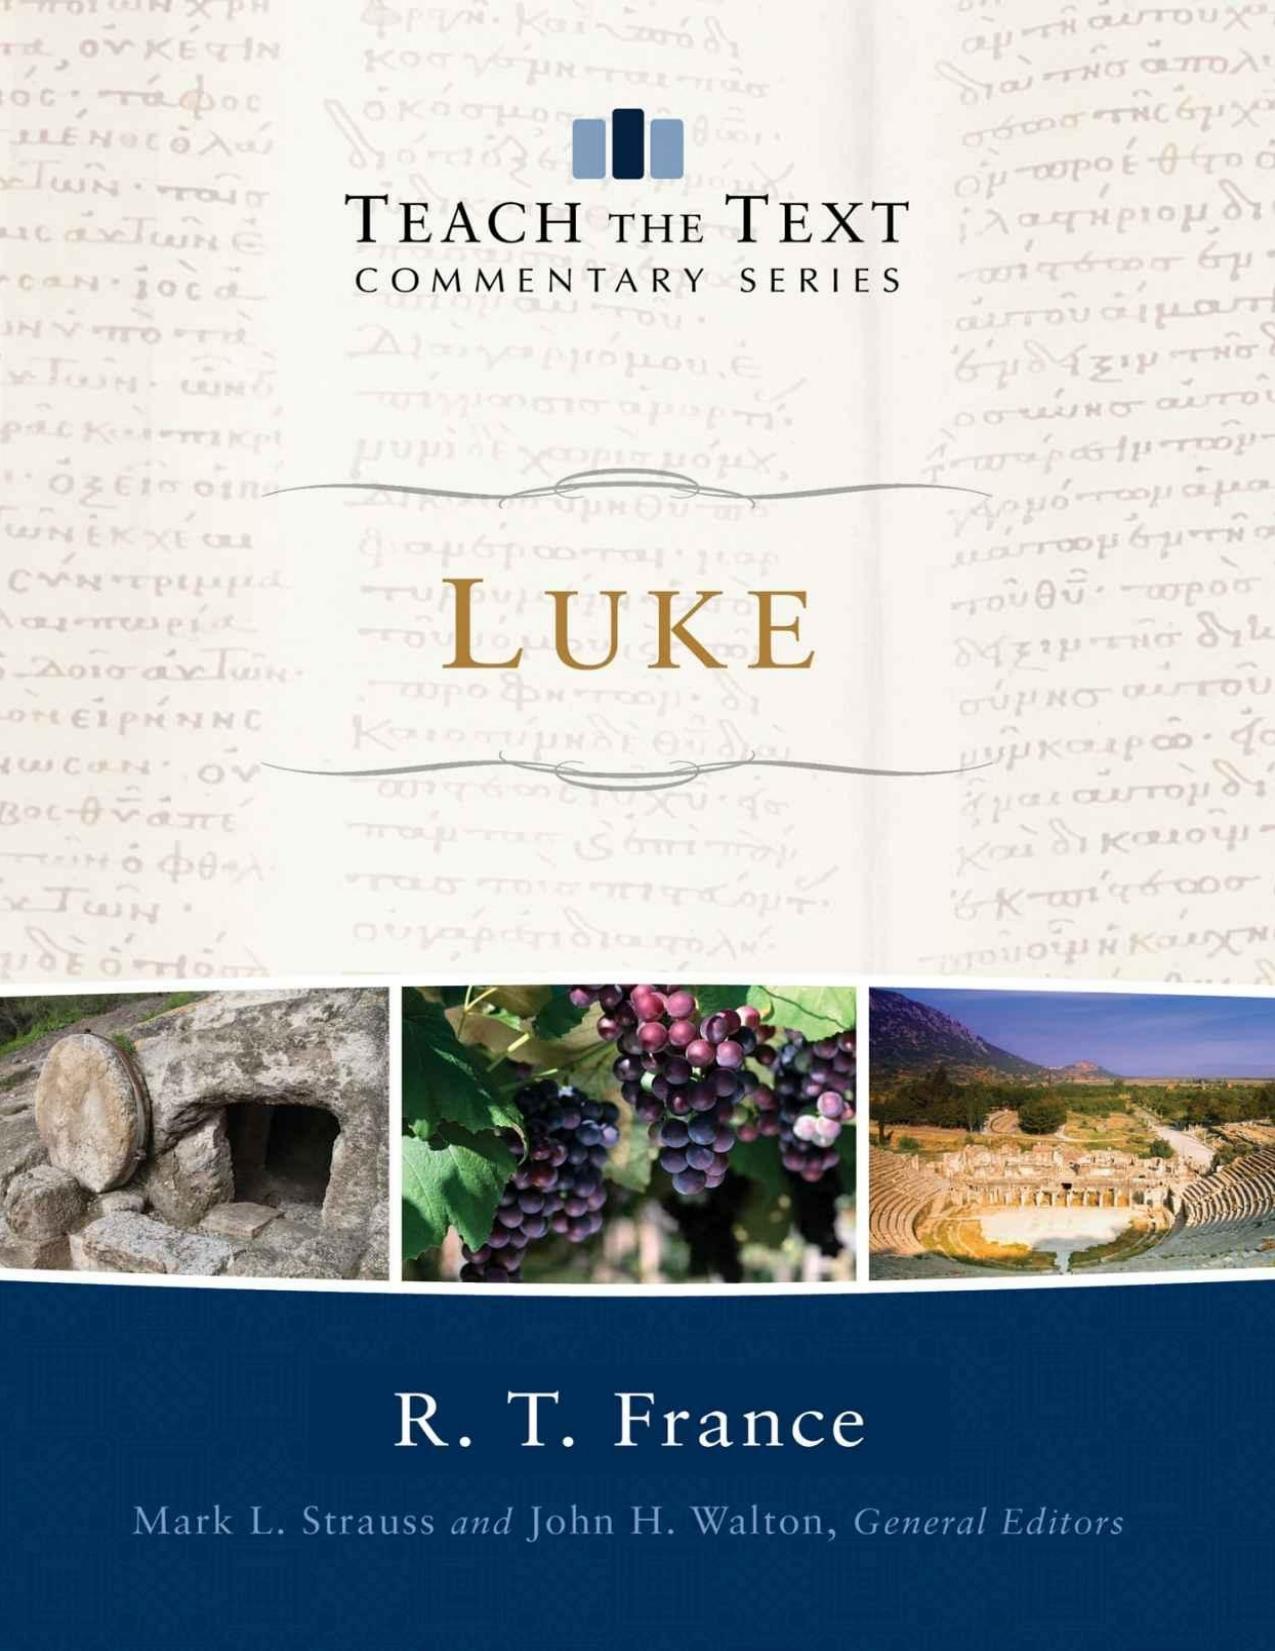 Luke \(Teach the Text Commentary Series\) - PDFDrive.com